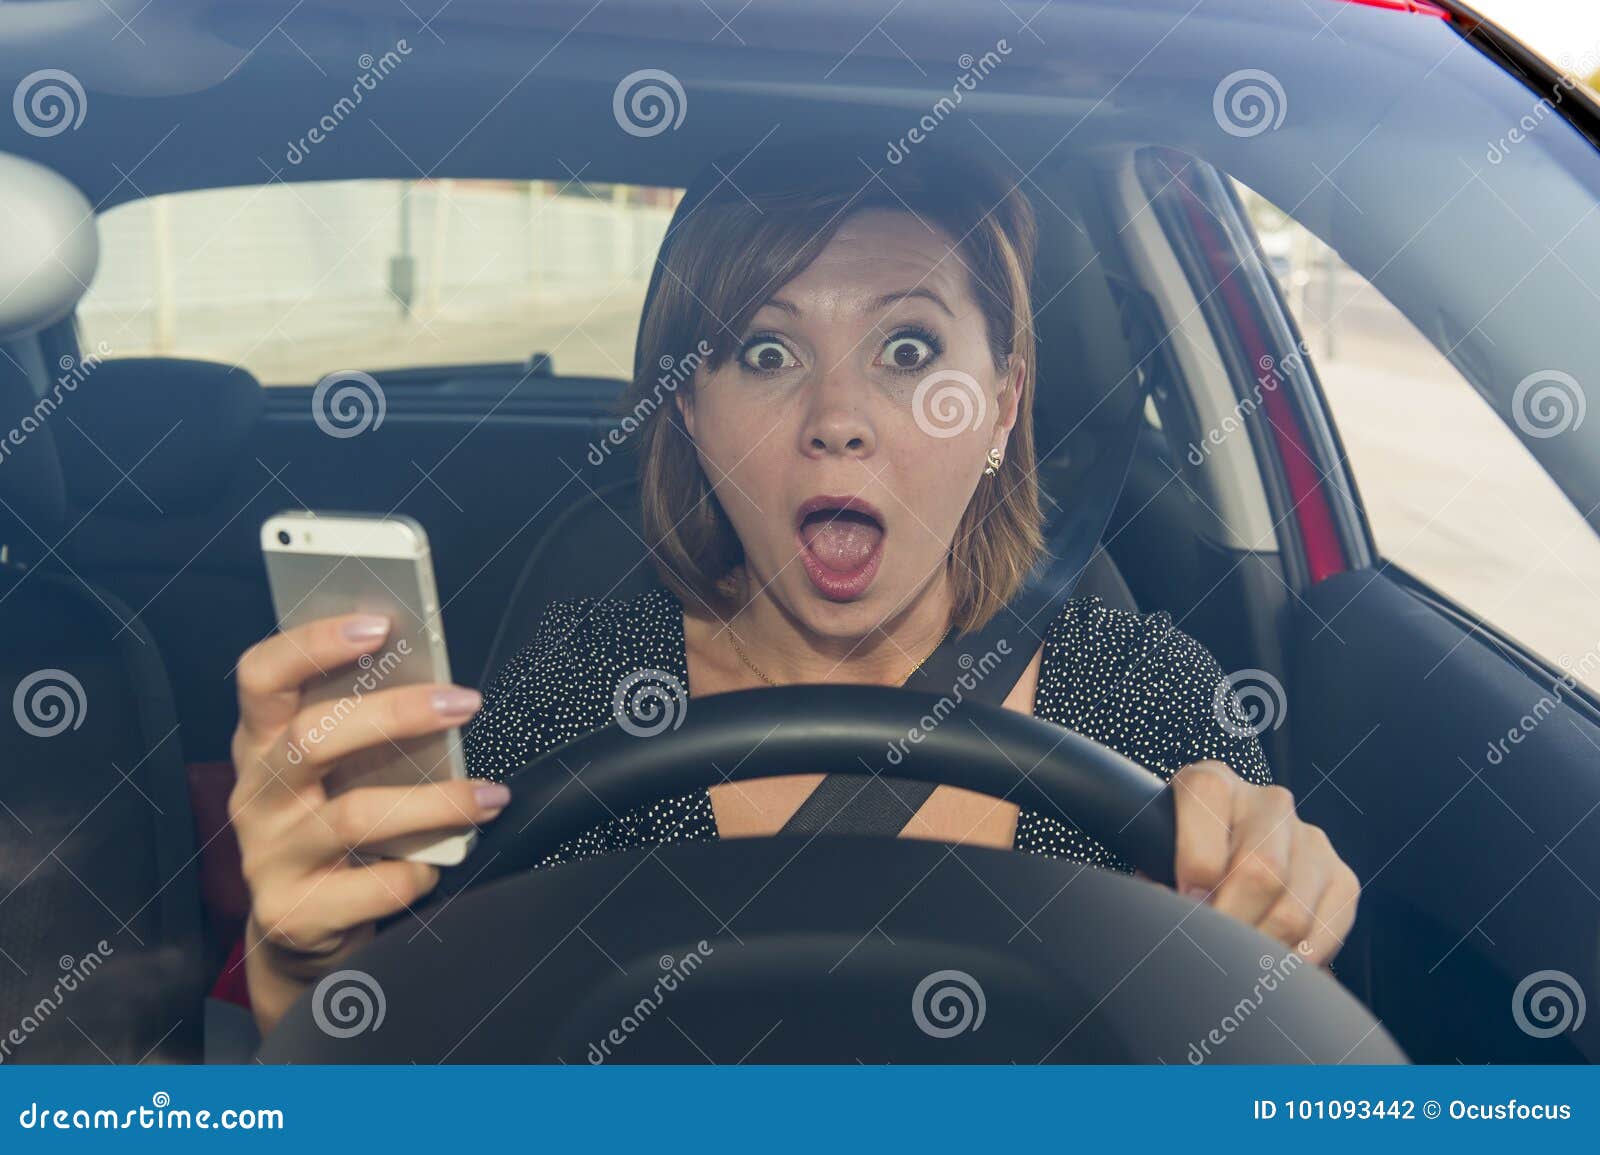 beautiful woman driving car while texting using mobile phone distracted